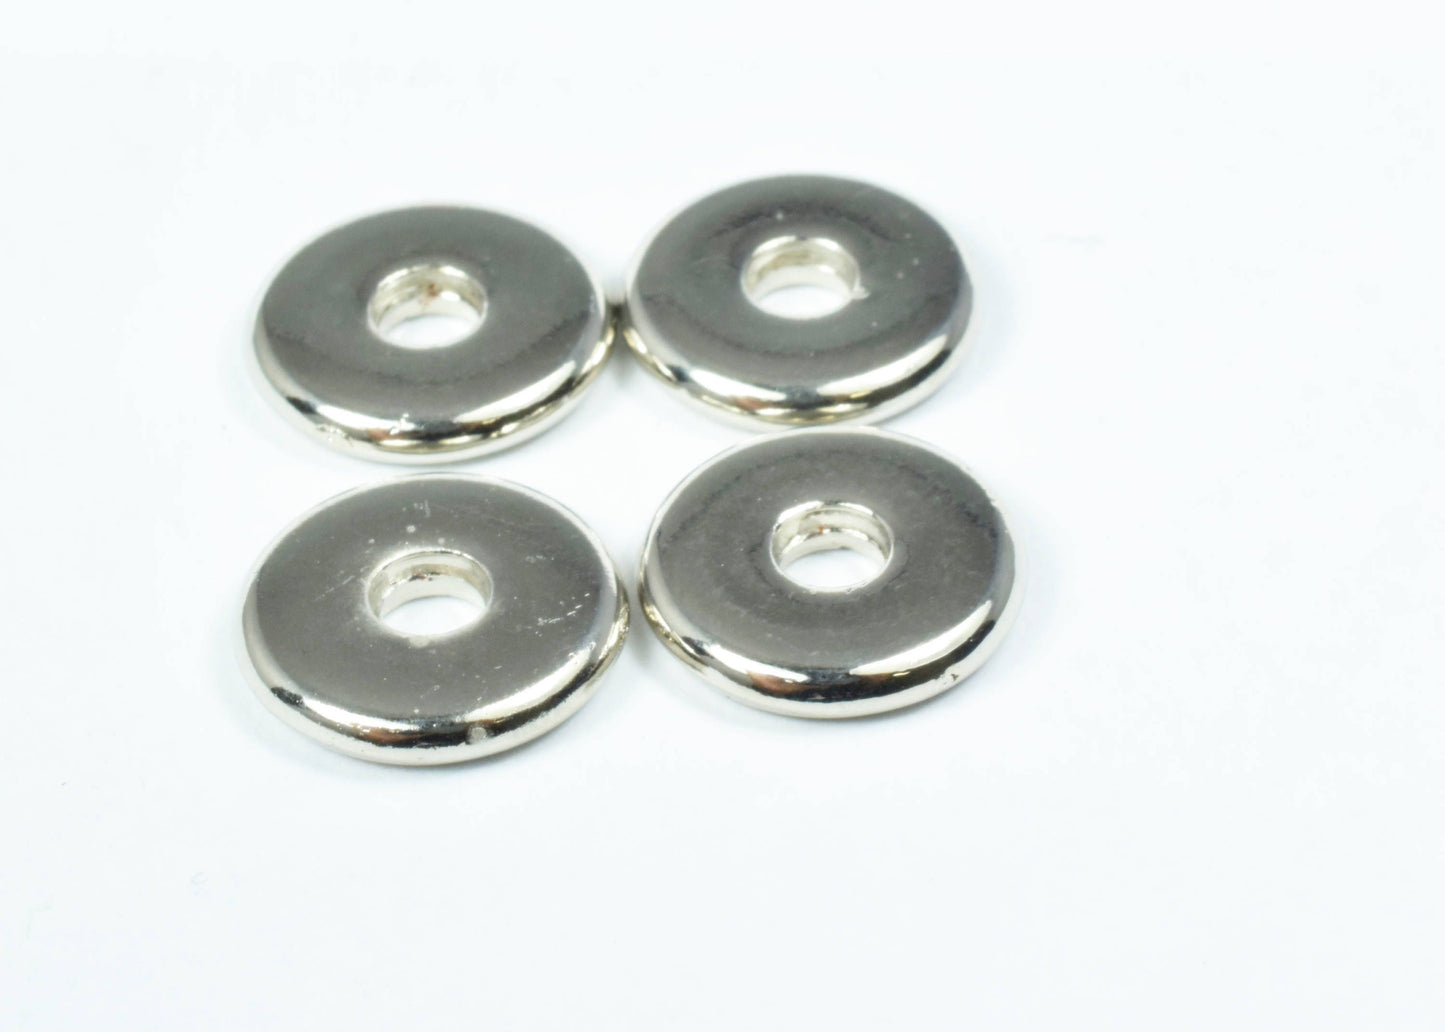 14mm Round Large Hole Silver Plastic Washer Beads, Washer Beads, Washer,Silver Heishi Smooth Disc Britannia Pewter, Silver Spacer Beads